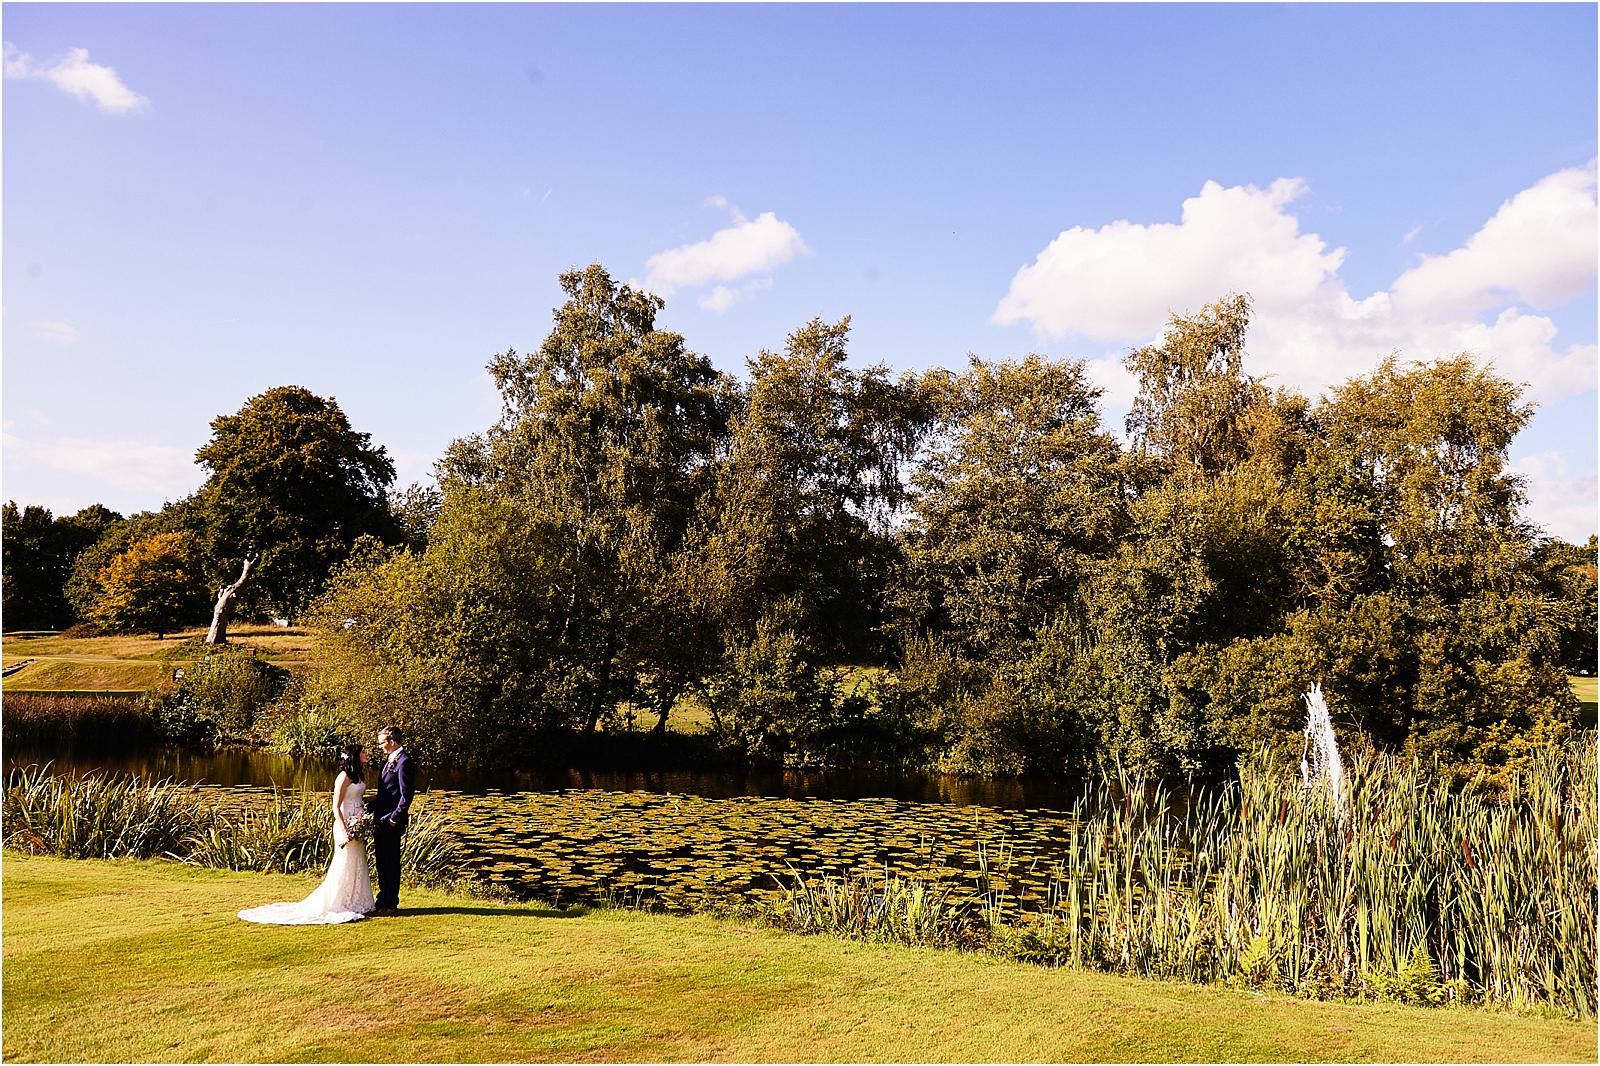 Creative wedding photography at Brocton Hall in Stafford by Associate Photographer with Stuart James Photography